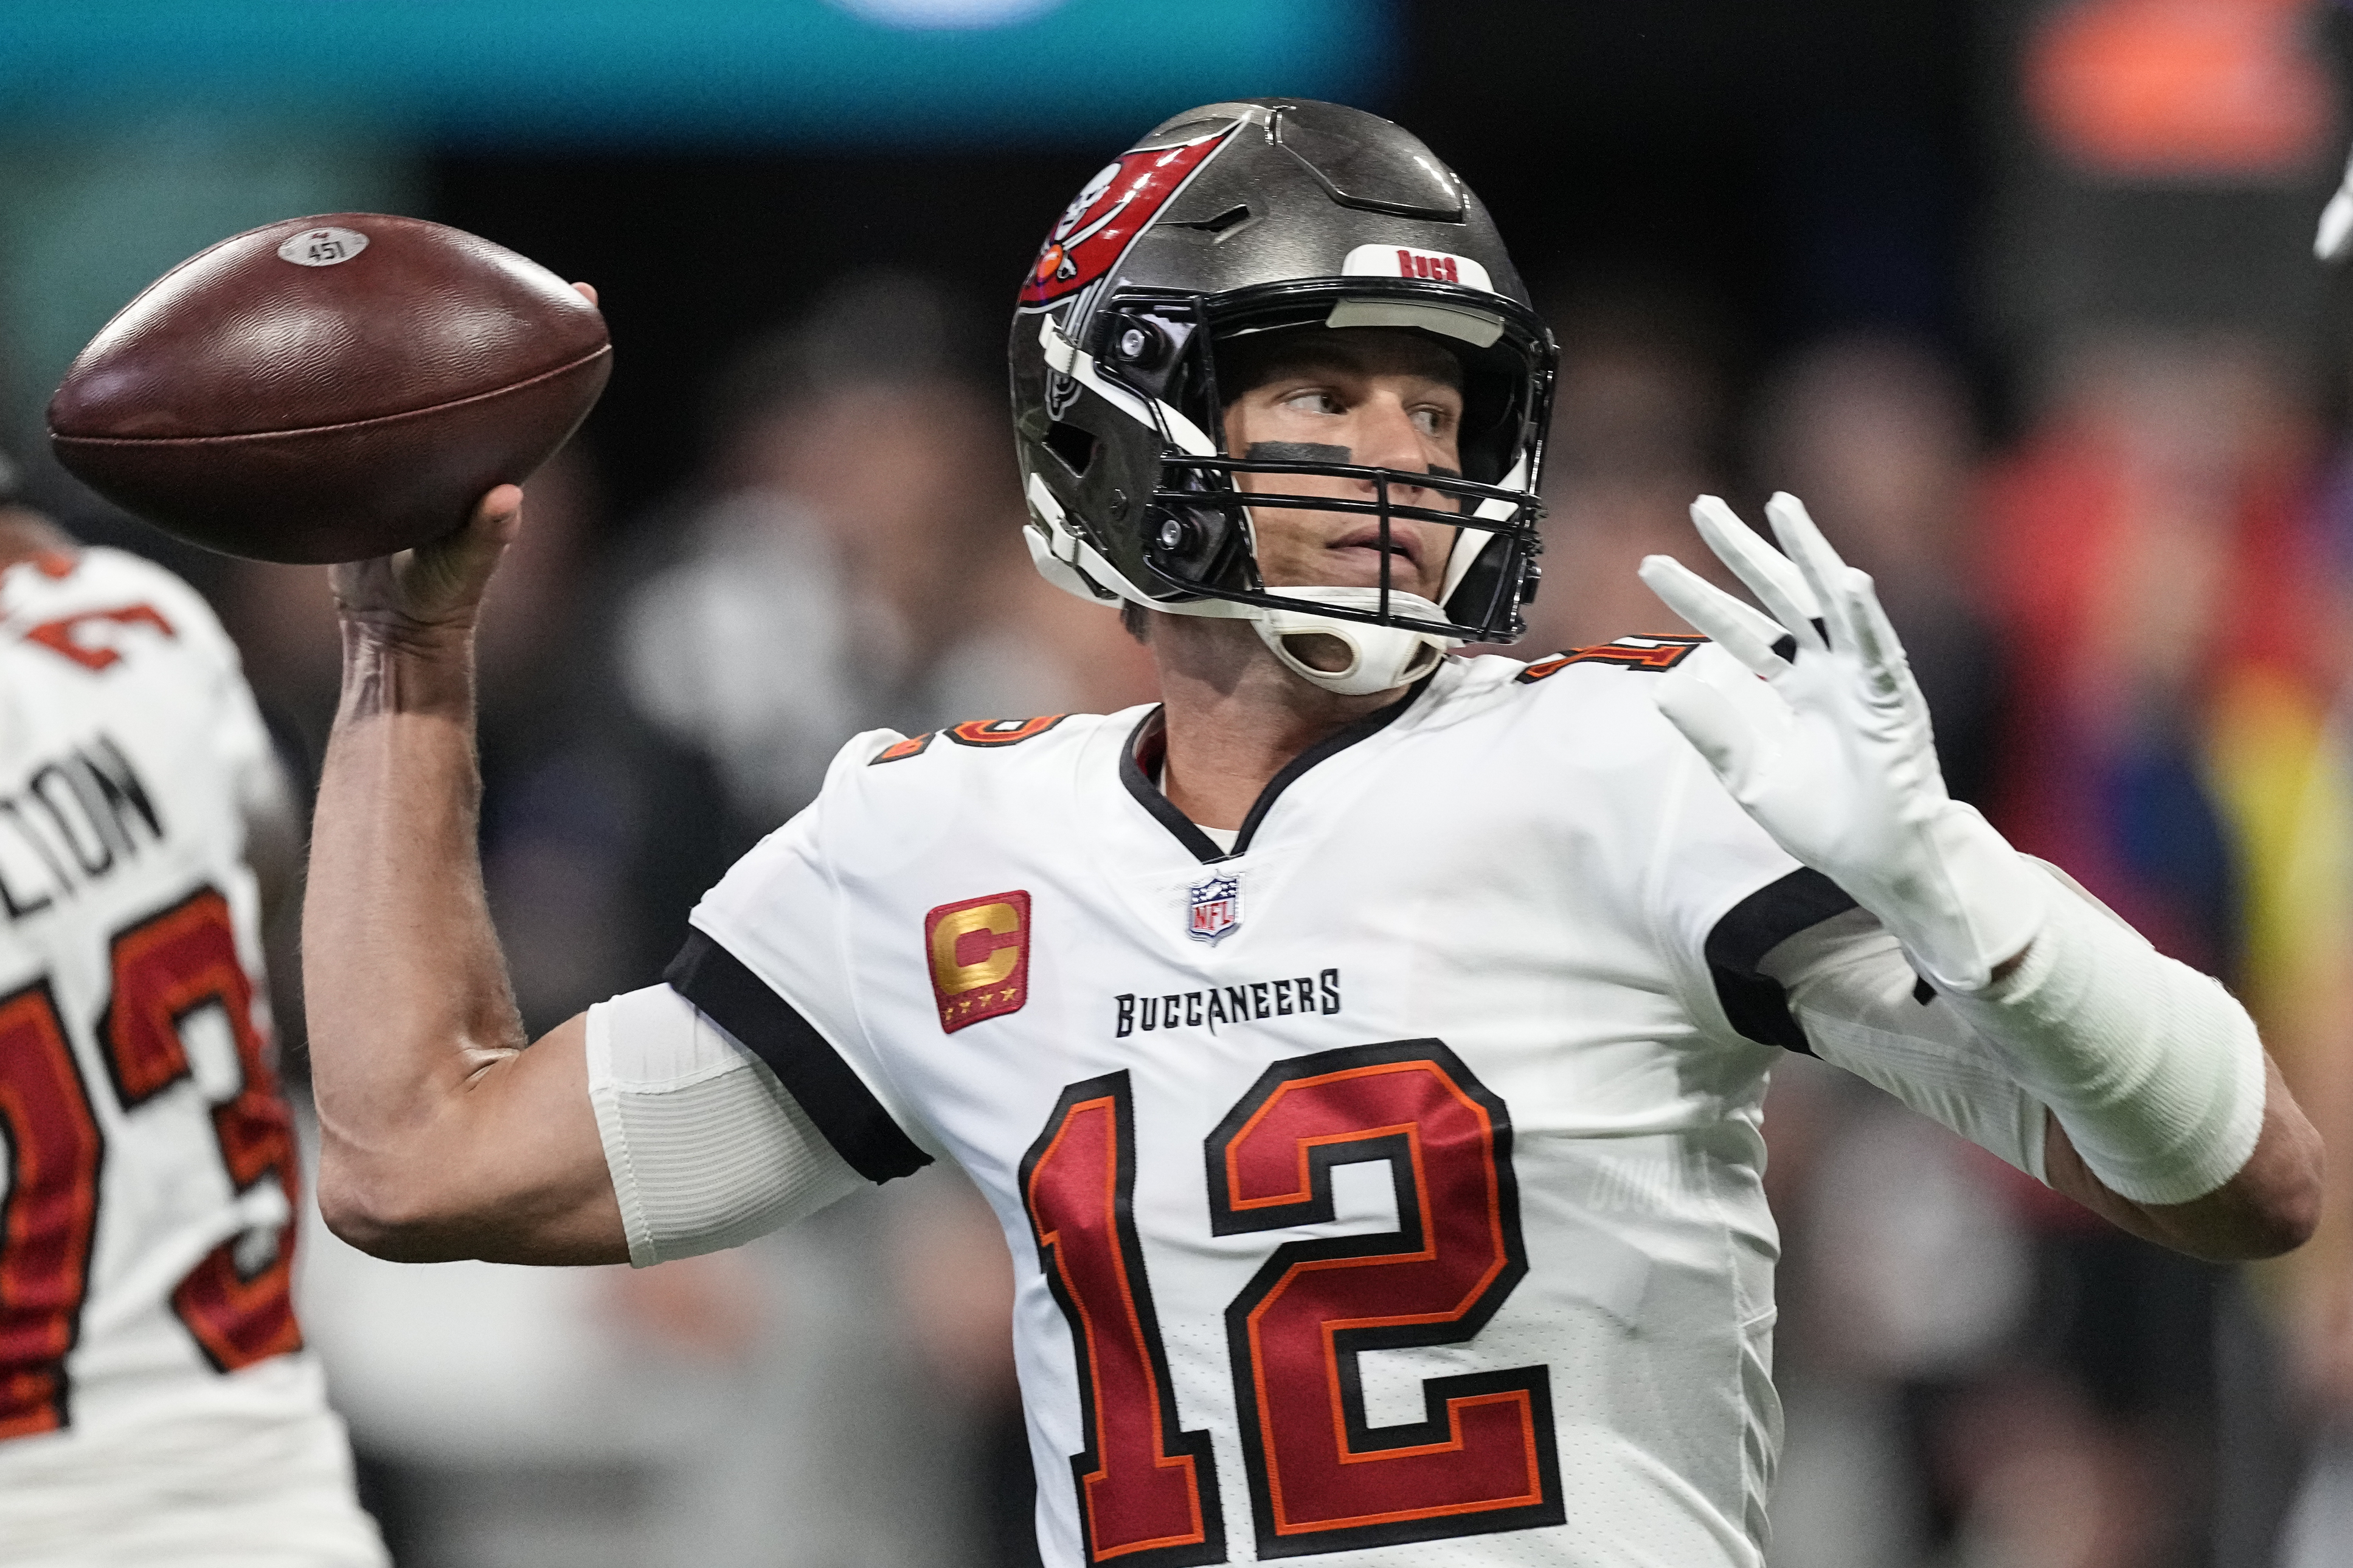 Buccaneers in red, Falcons in white for Color Rush - Bucs Nation